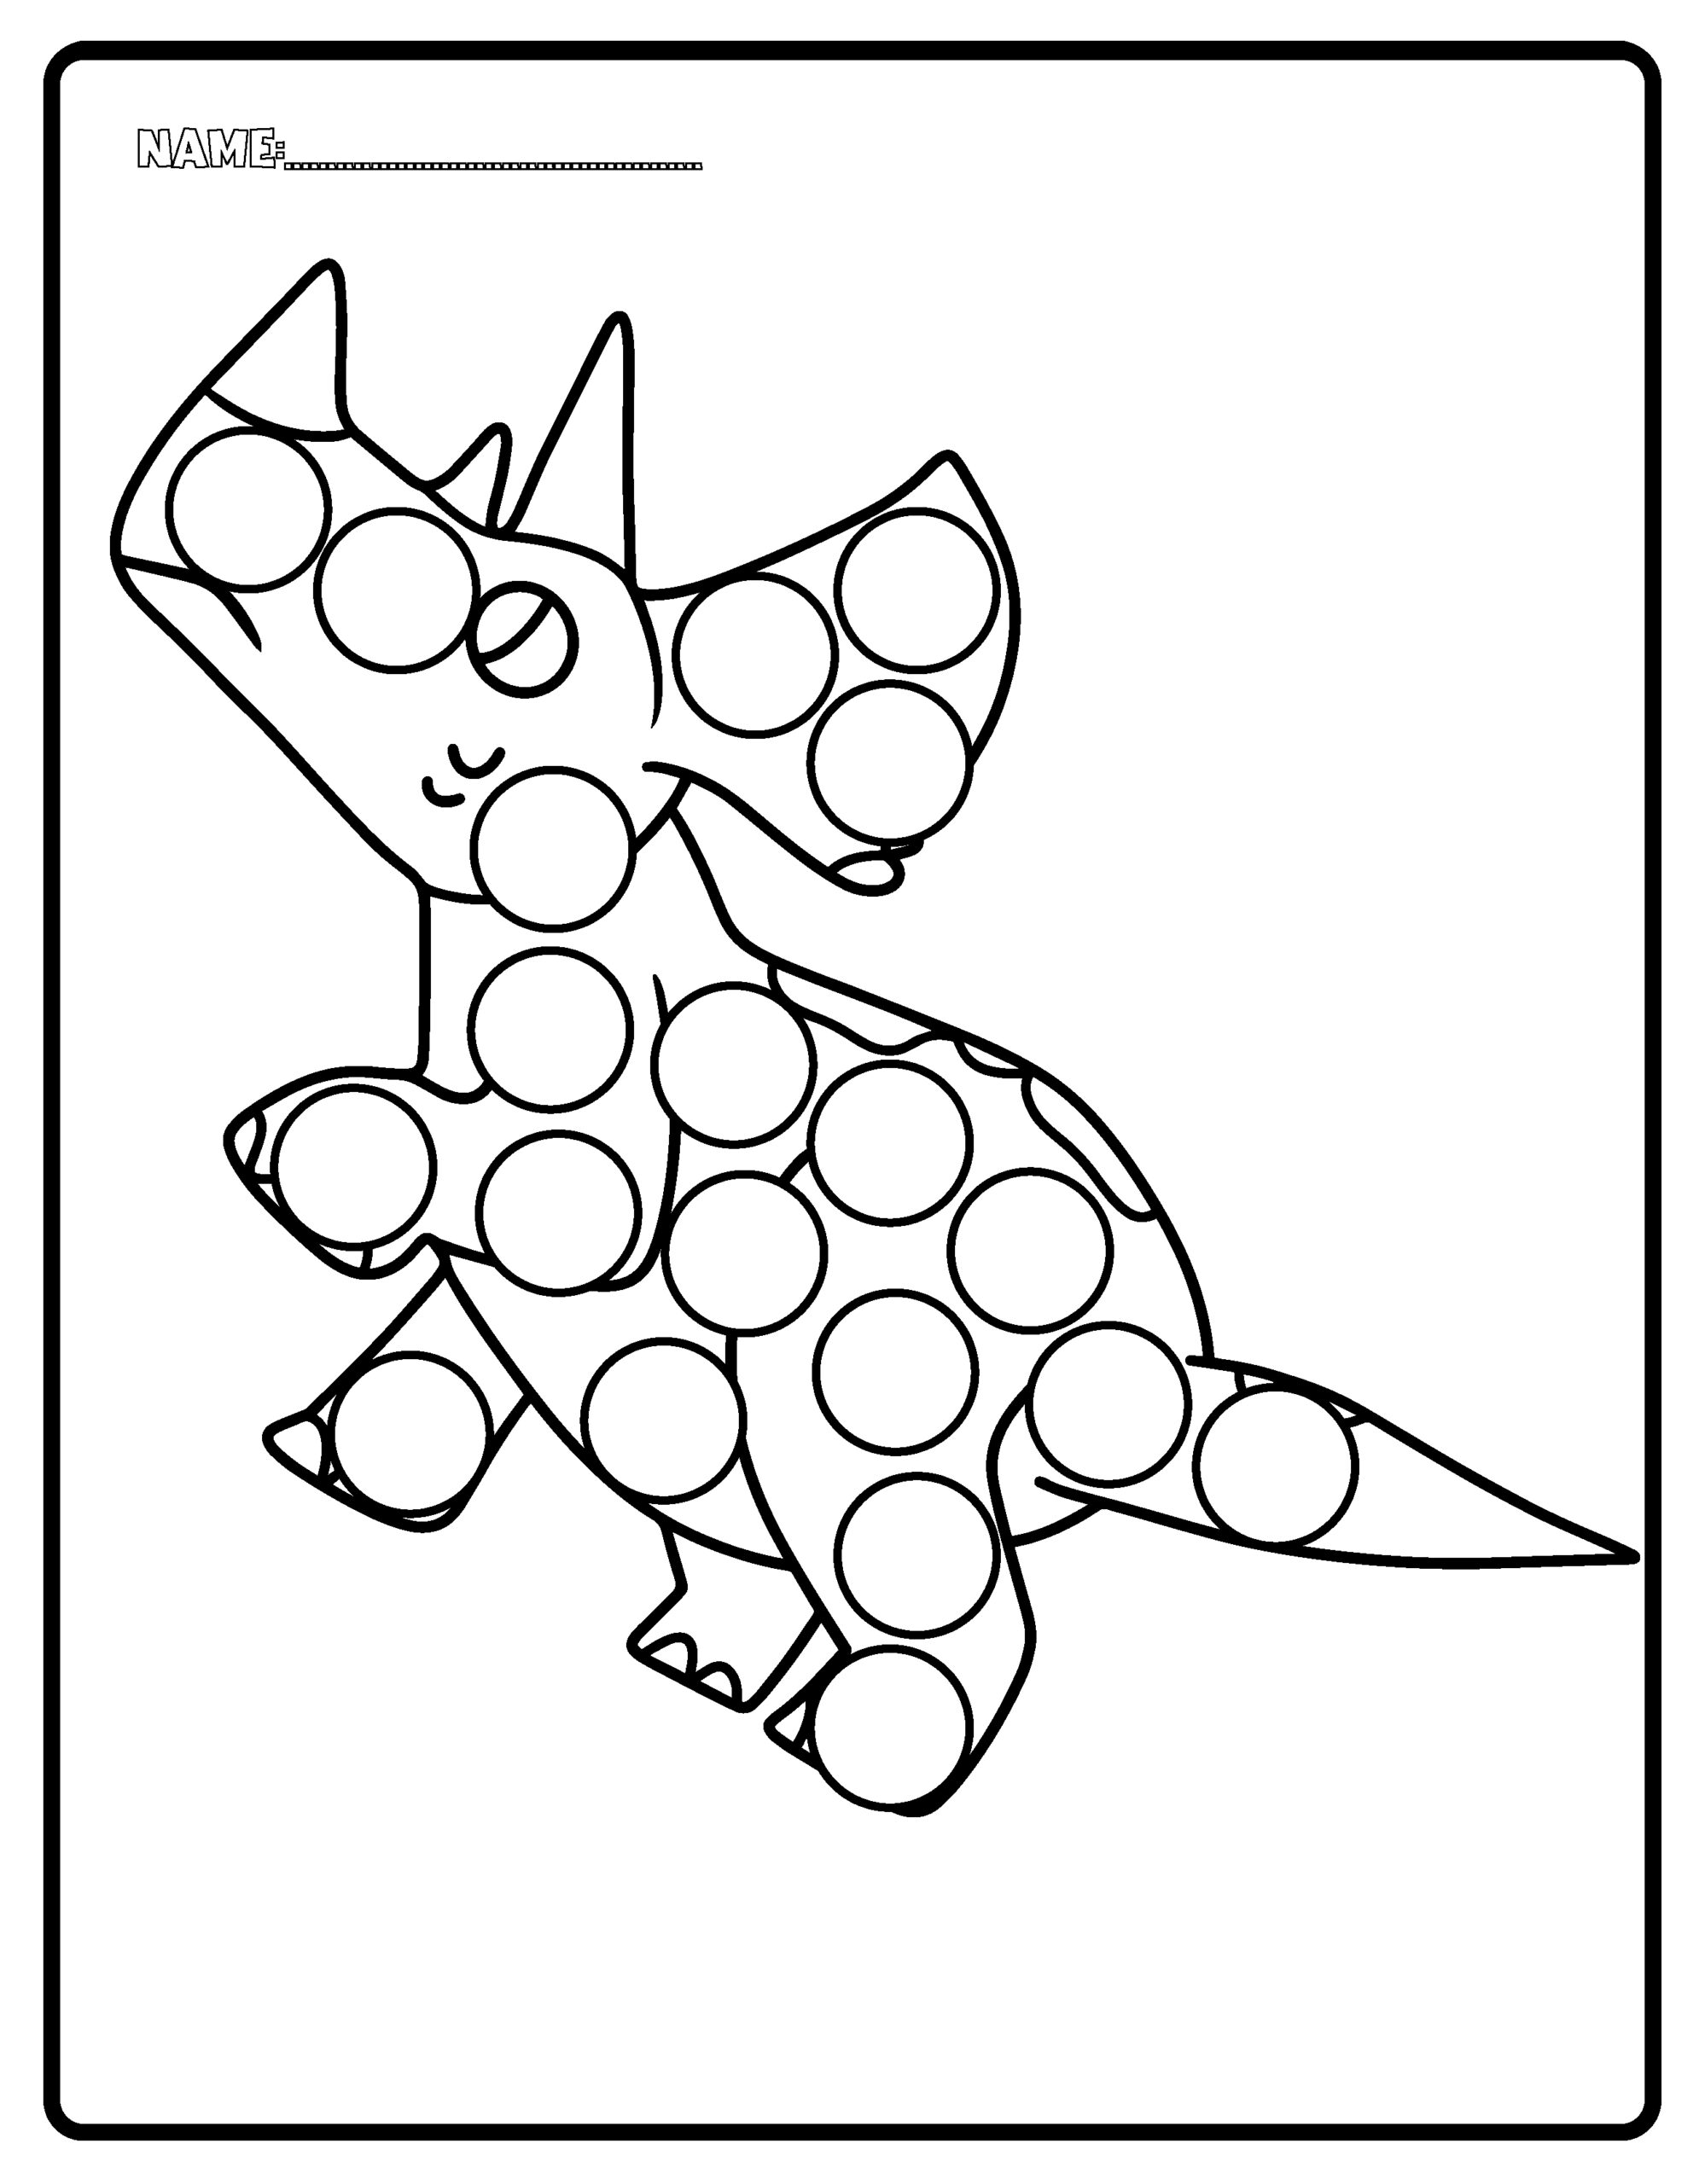 Dino-Dots: Fun and Easy Dot Marker Coloring Pages for Kids | Made By  Teachers